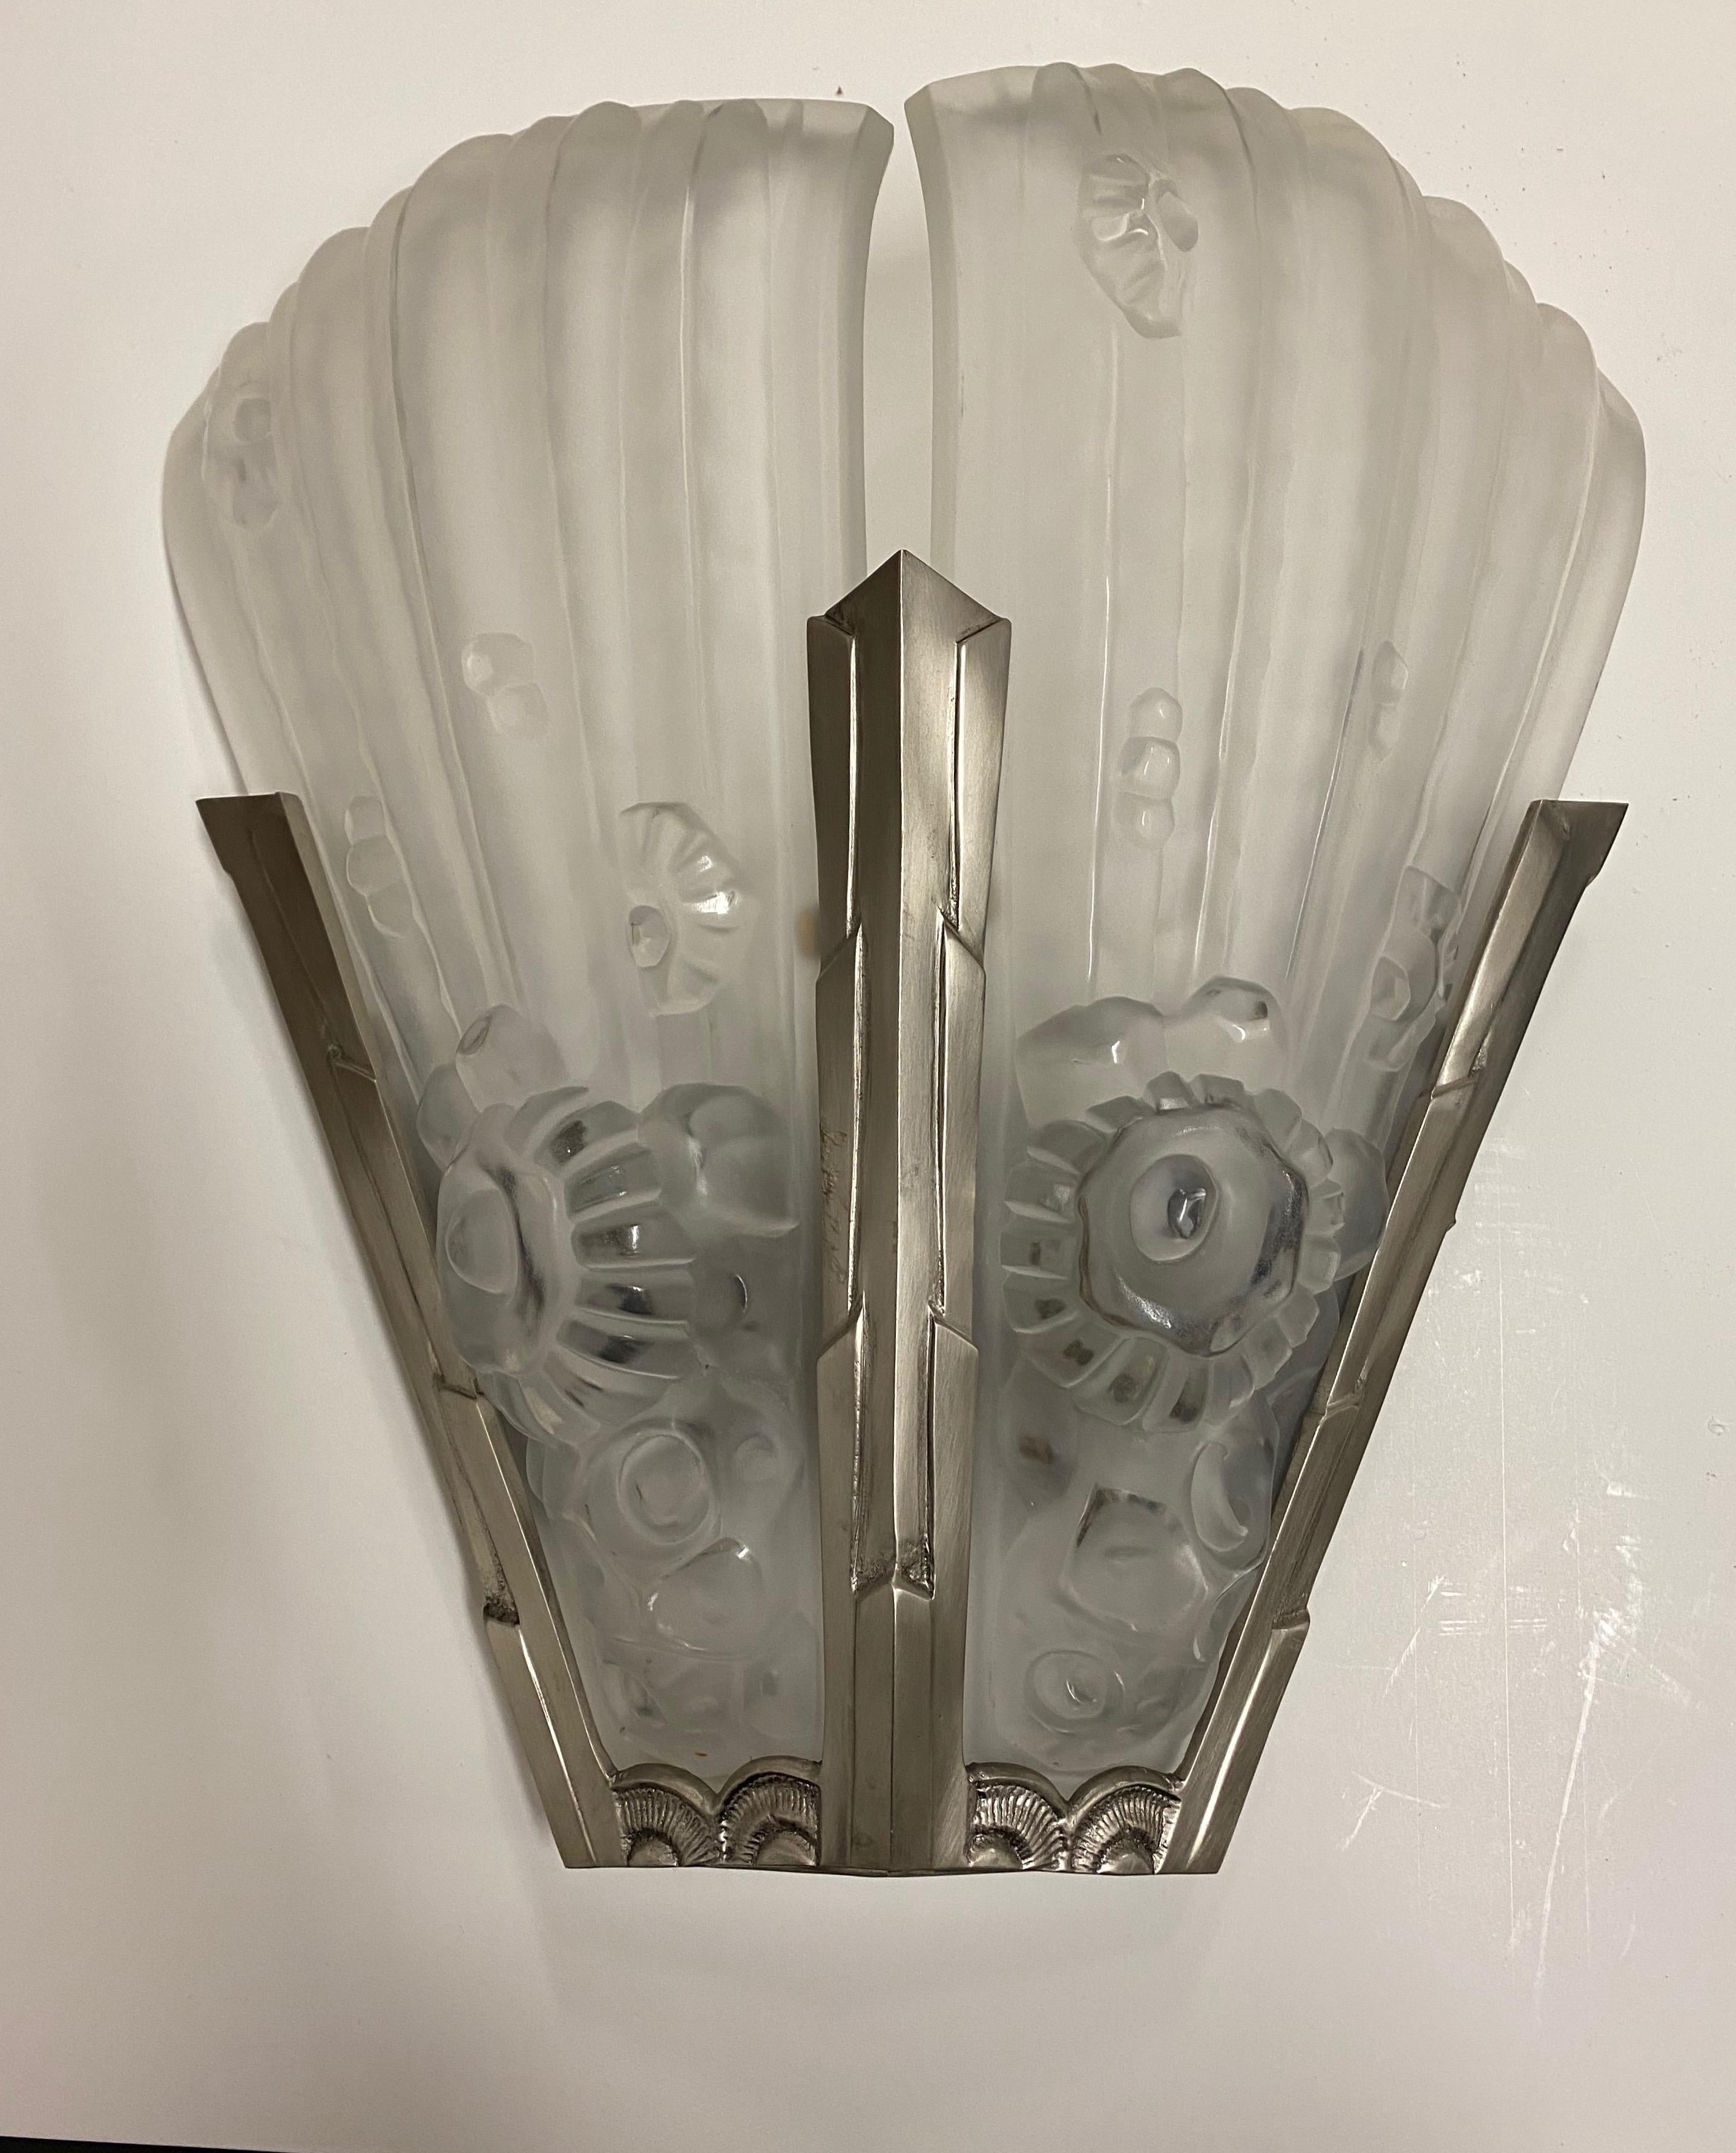 A pair of French Art Deco wall sconces by French artist Genet et Michon in clear frosted glass shades with floral and geometric motif details. Each sconce take two glass panels. Mounted in polished geometric nickel frame. Re-plating upon request.